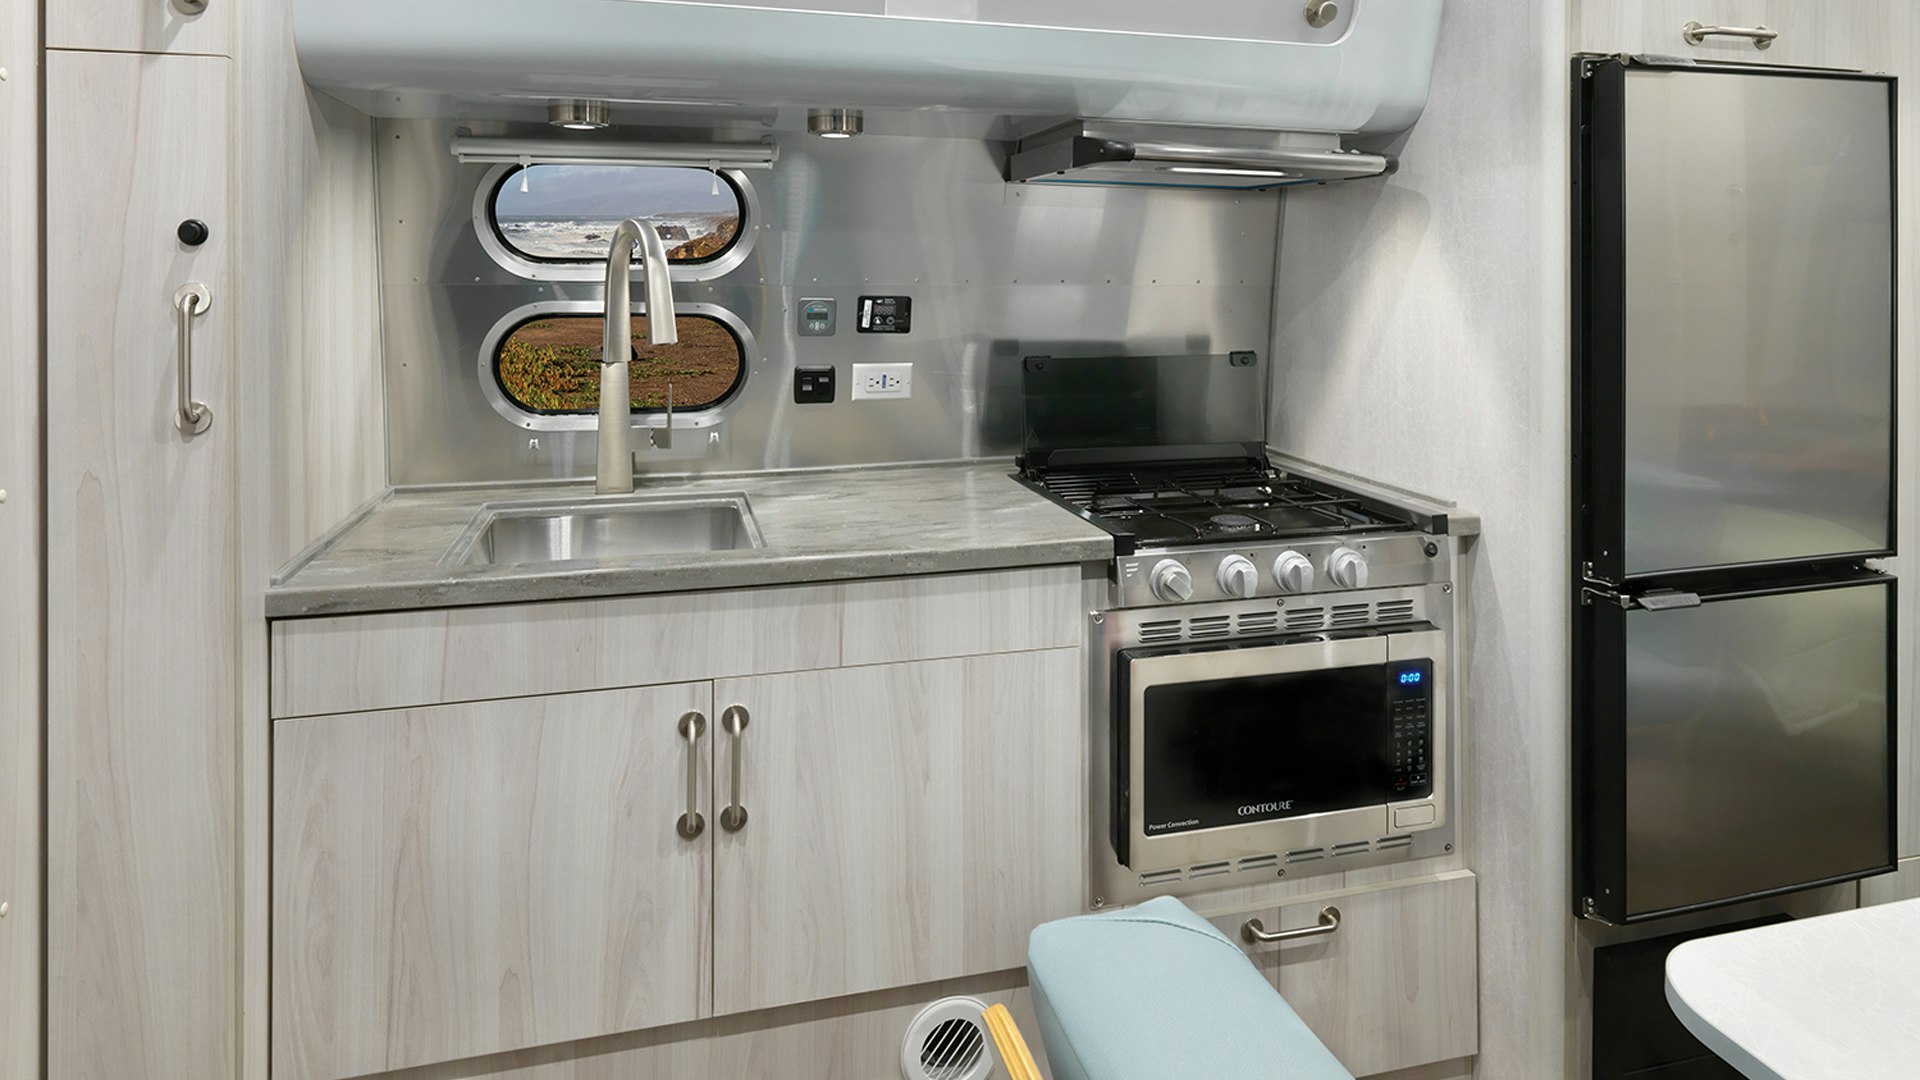 The galley of the Airstream 2023 International 23FB travel trailer with a window looking out at scenery in California.